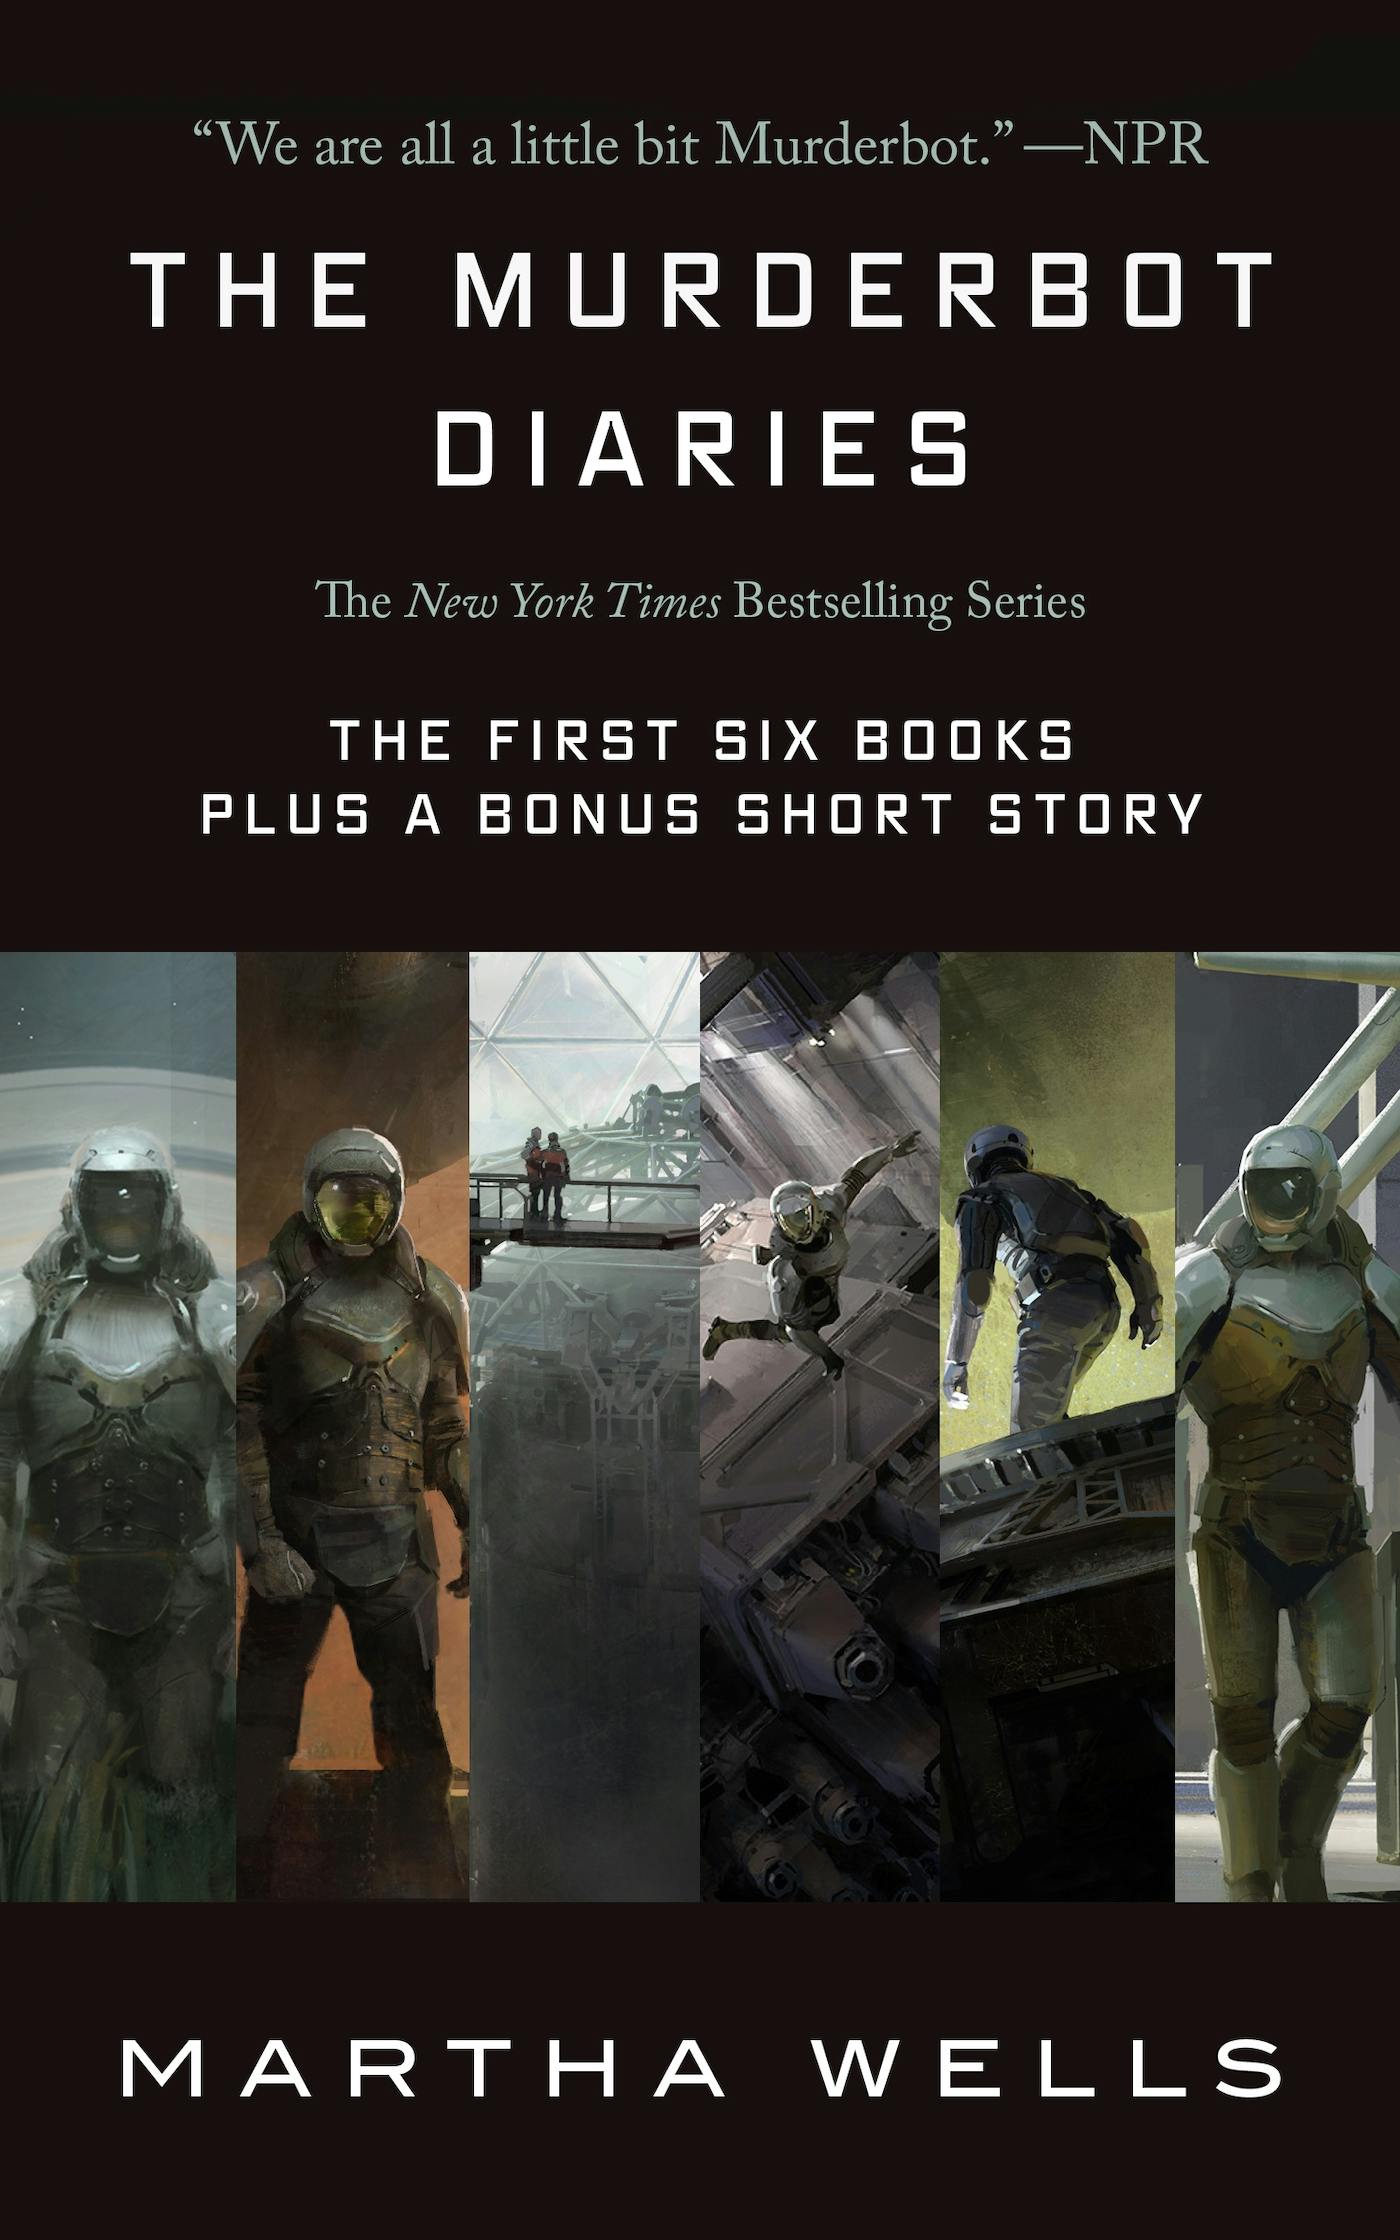 Cover for the book titled as: The Murderbot Diaries